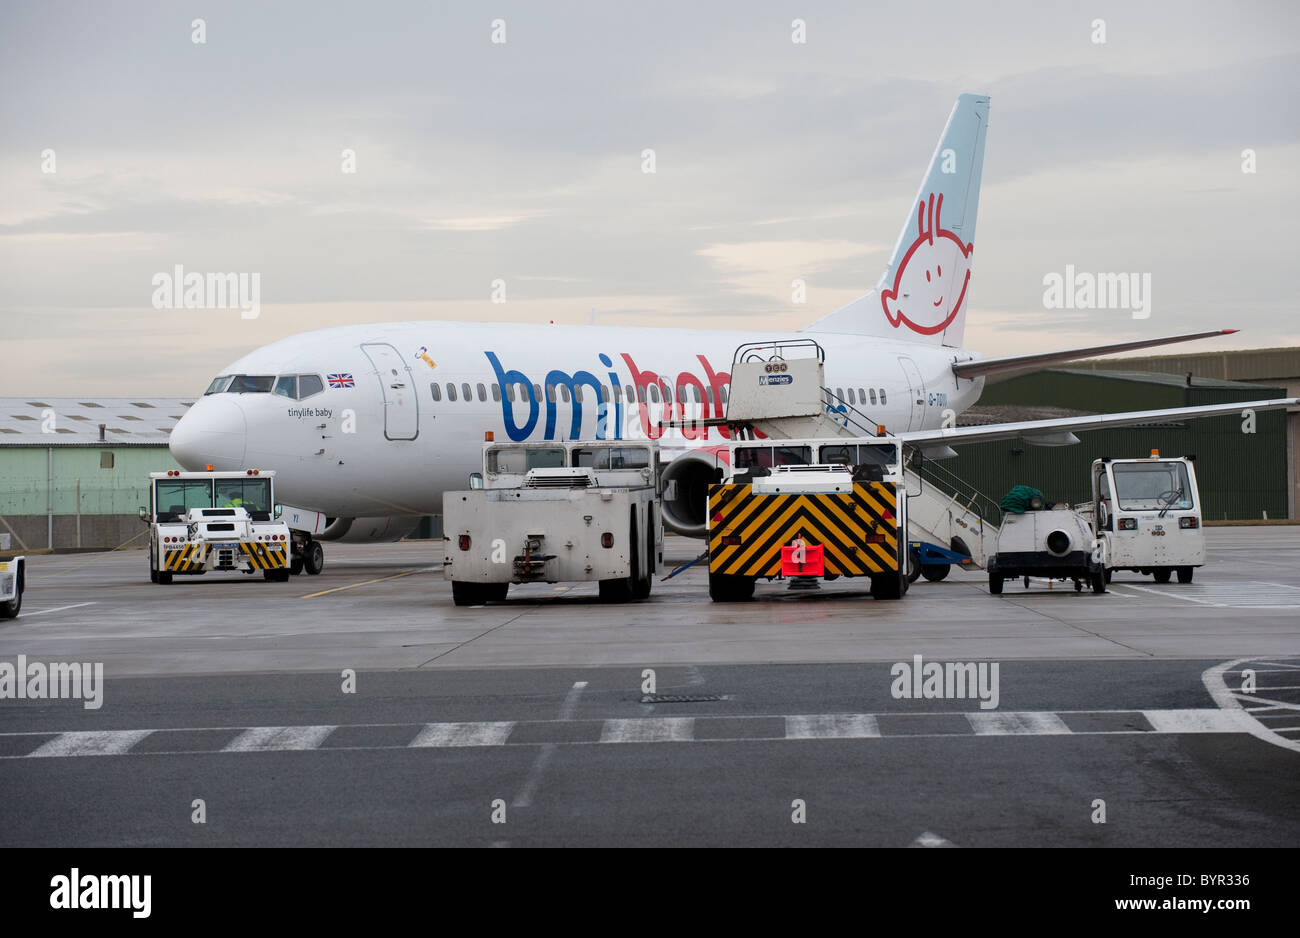 A Bmi Baby Boeing 737 Aircraft On The Apron At Nottingham East